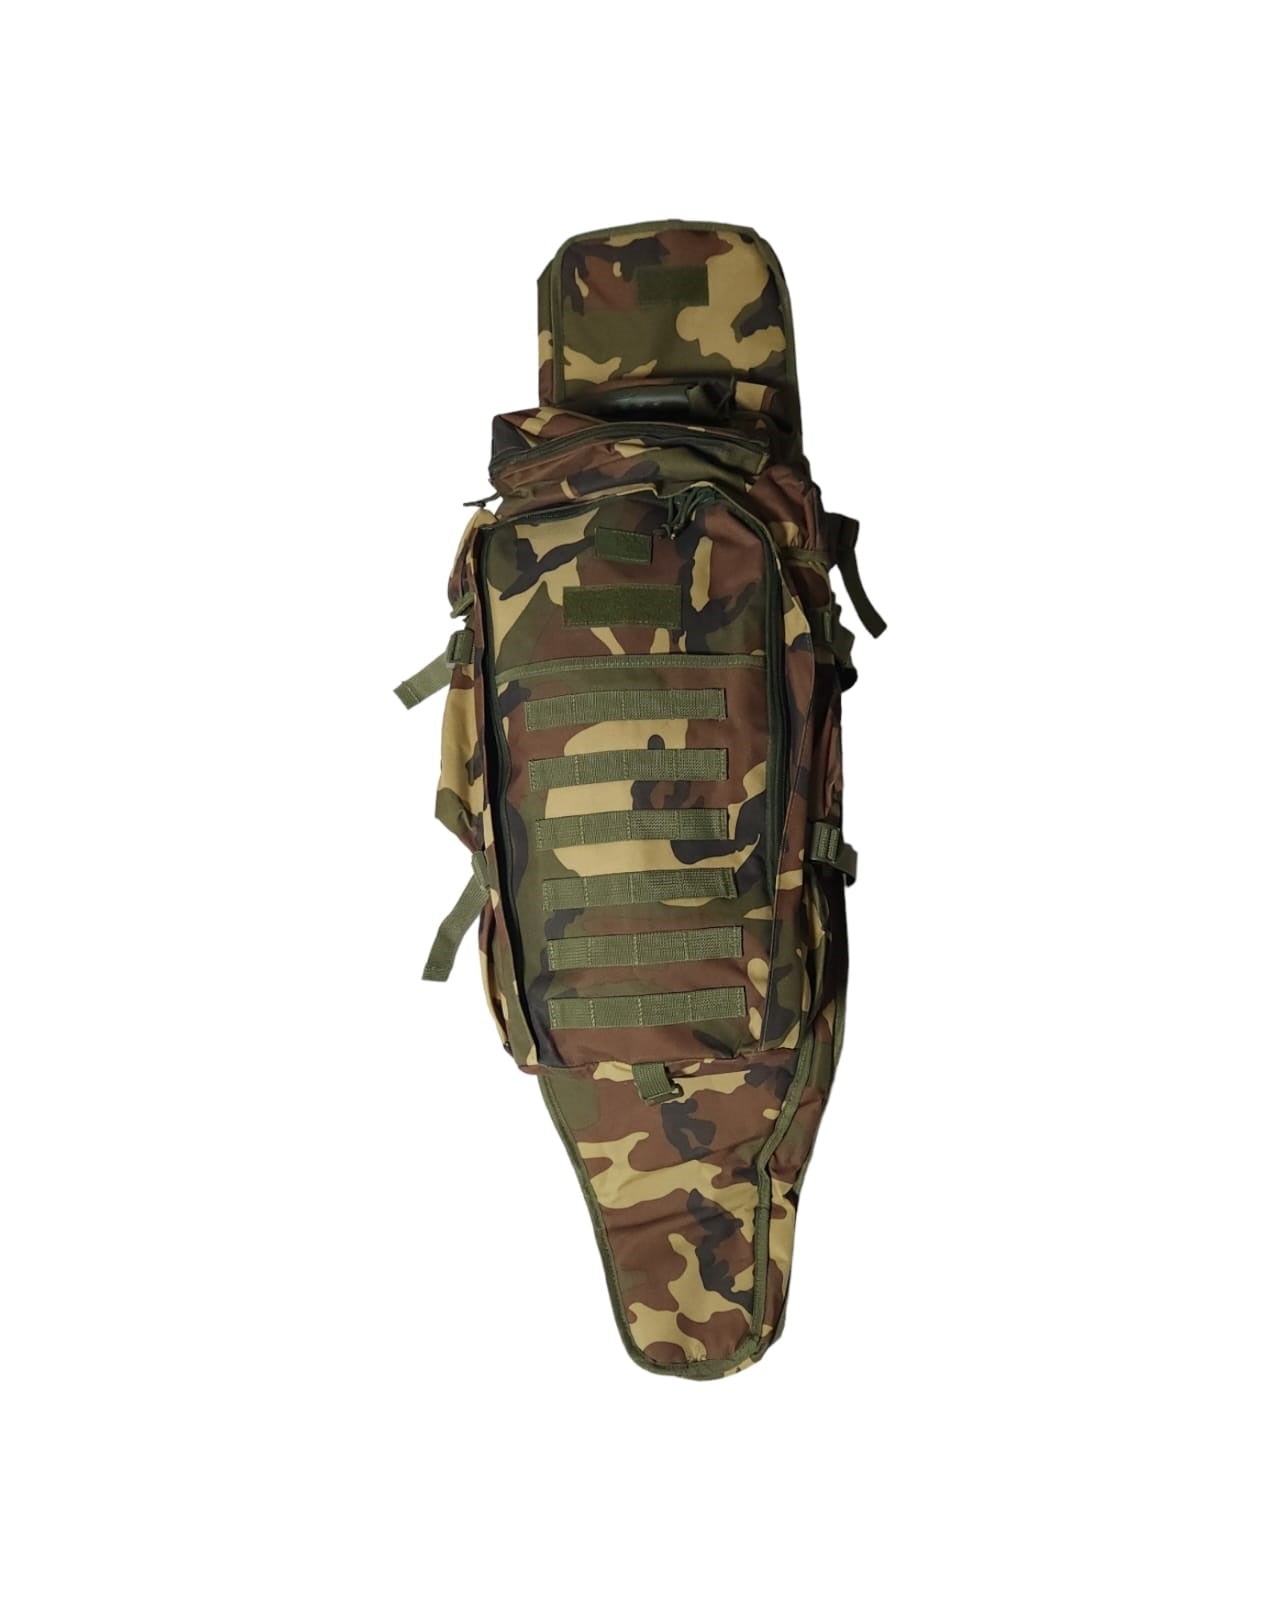 Camouflage Backpack Rifle Gun Bag for Hunting - Woodland Camouflage